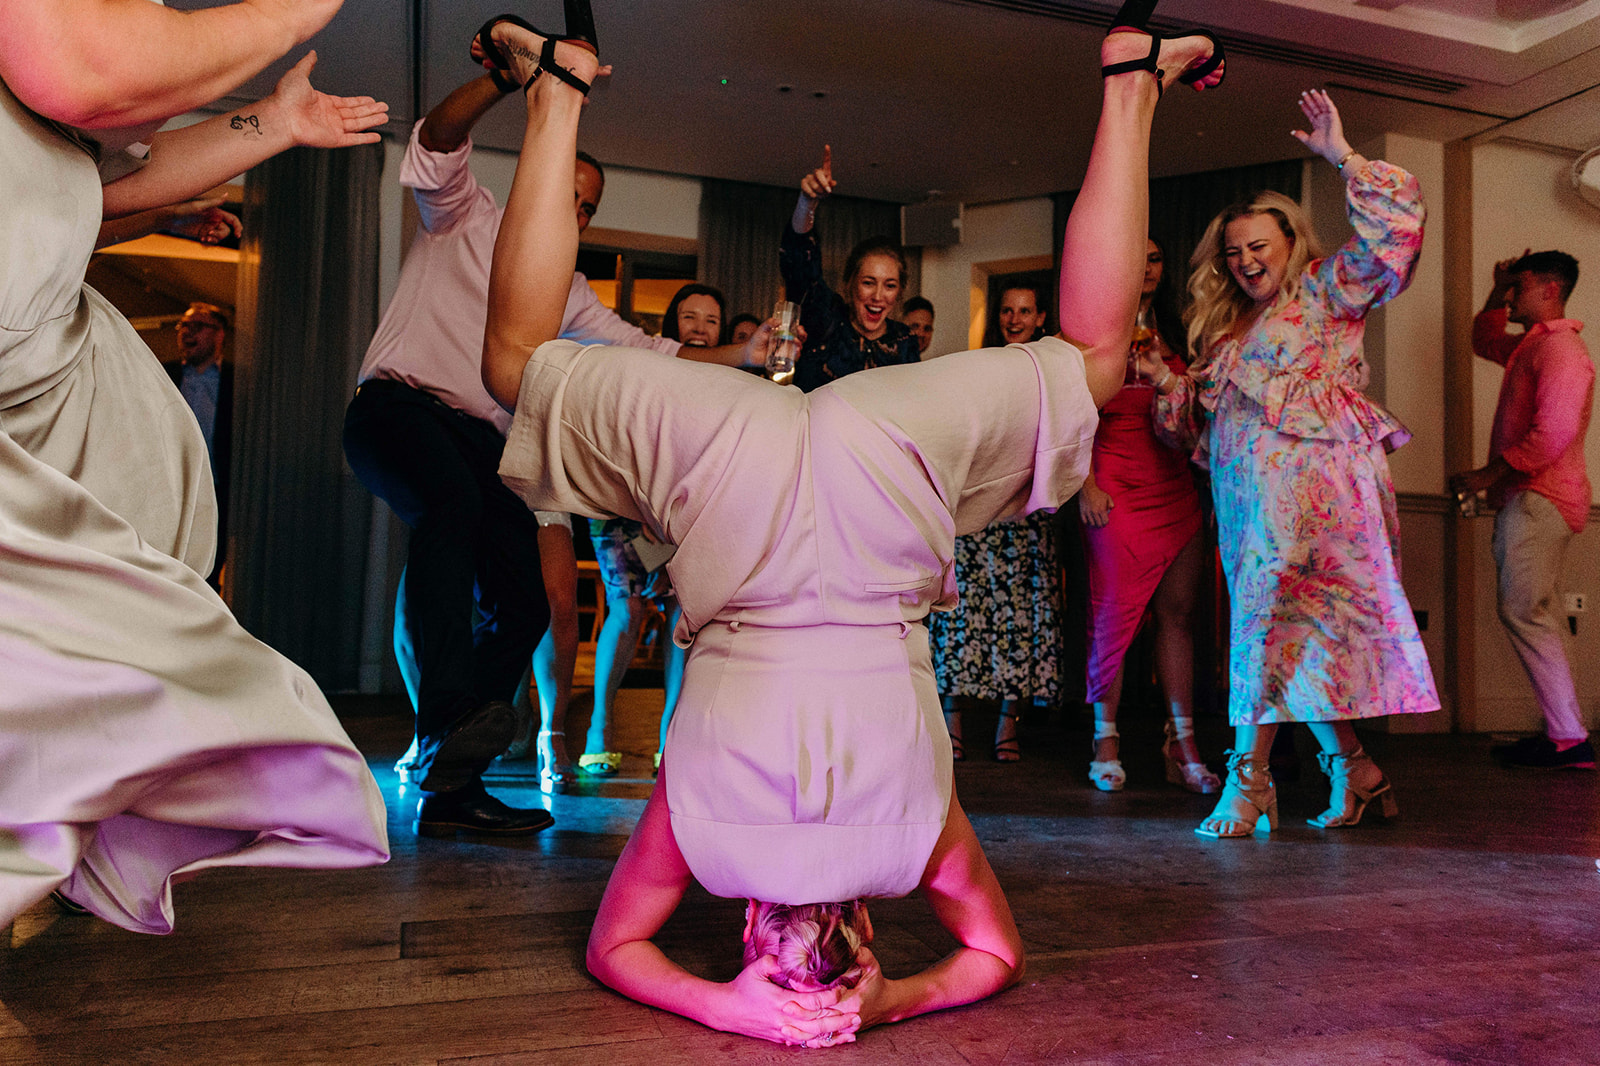 Energetic wedding moment: Guest performs a headstand on the dance floor, surrounded by cheering crowd at a lively party.